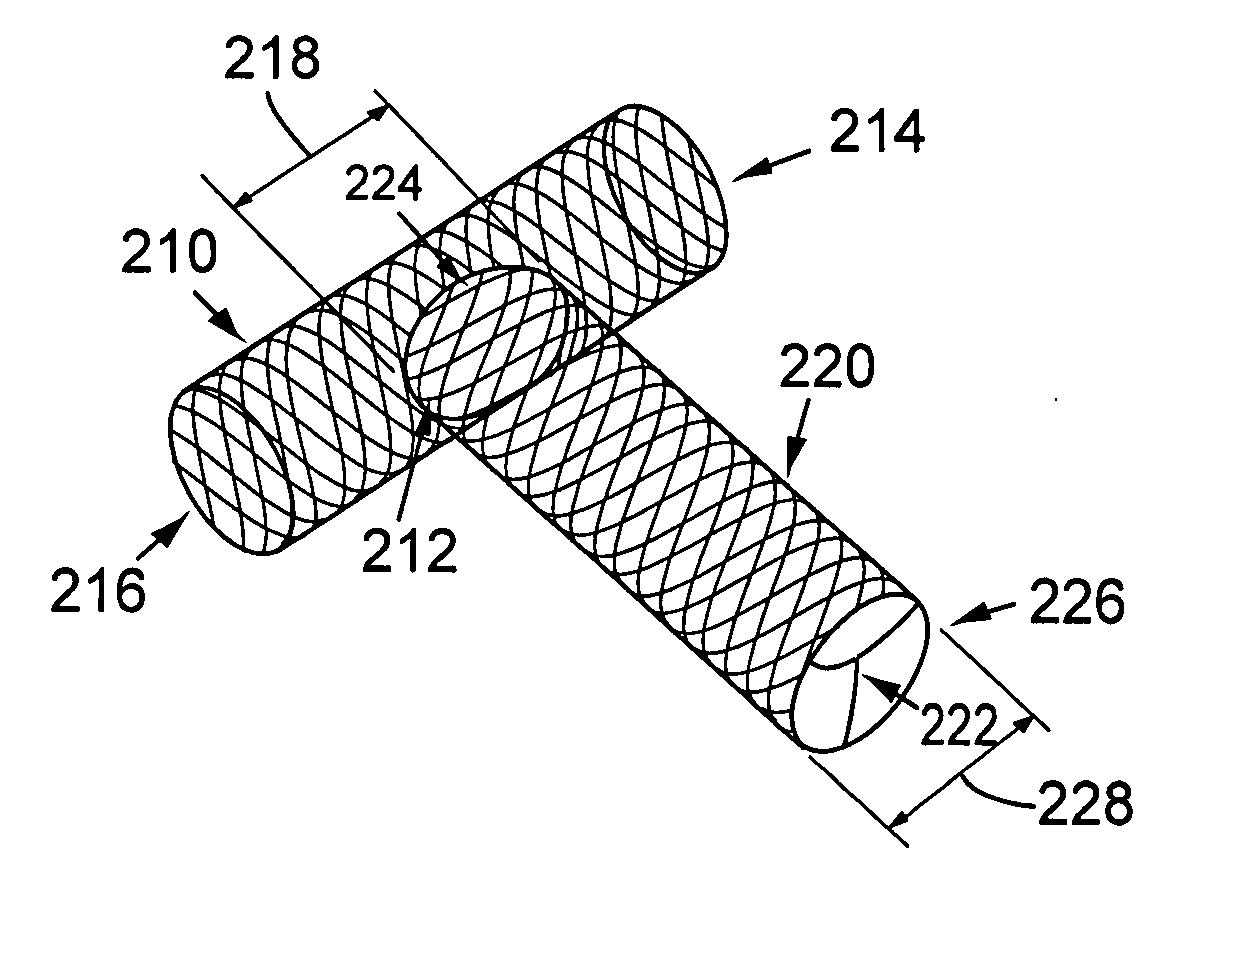 Catheter system with stent apparatus for connecting adjacent blood vessels